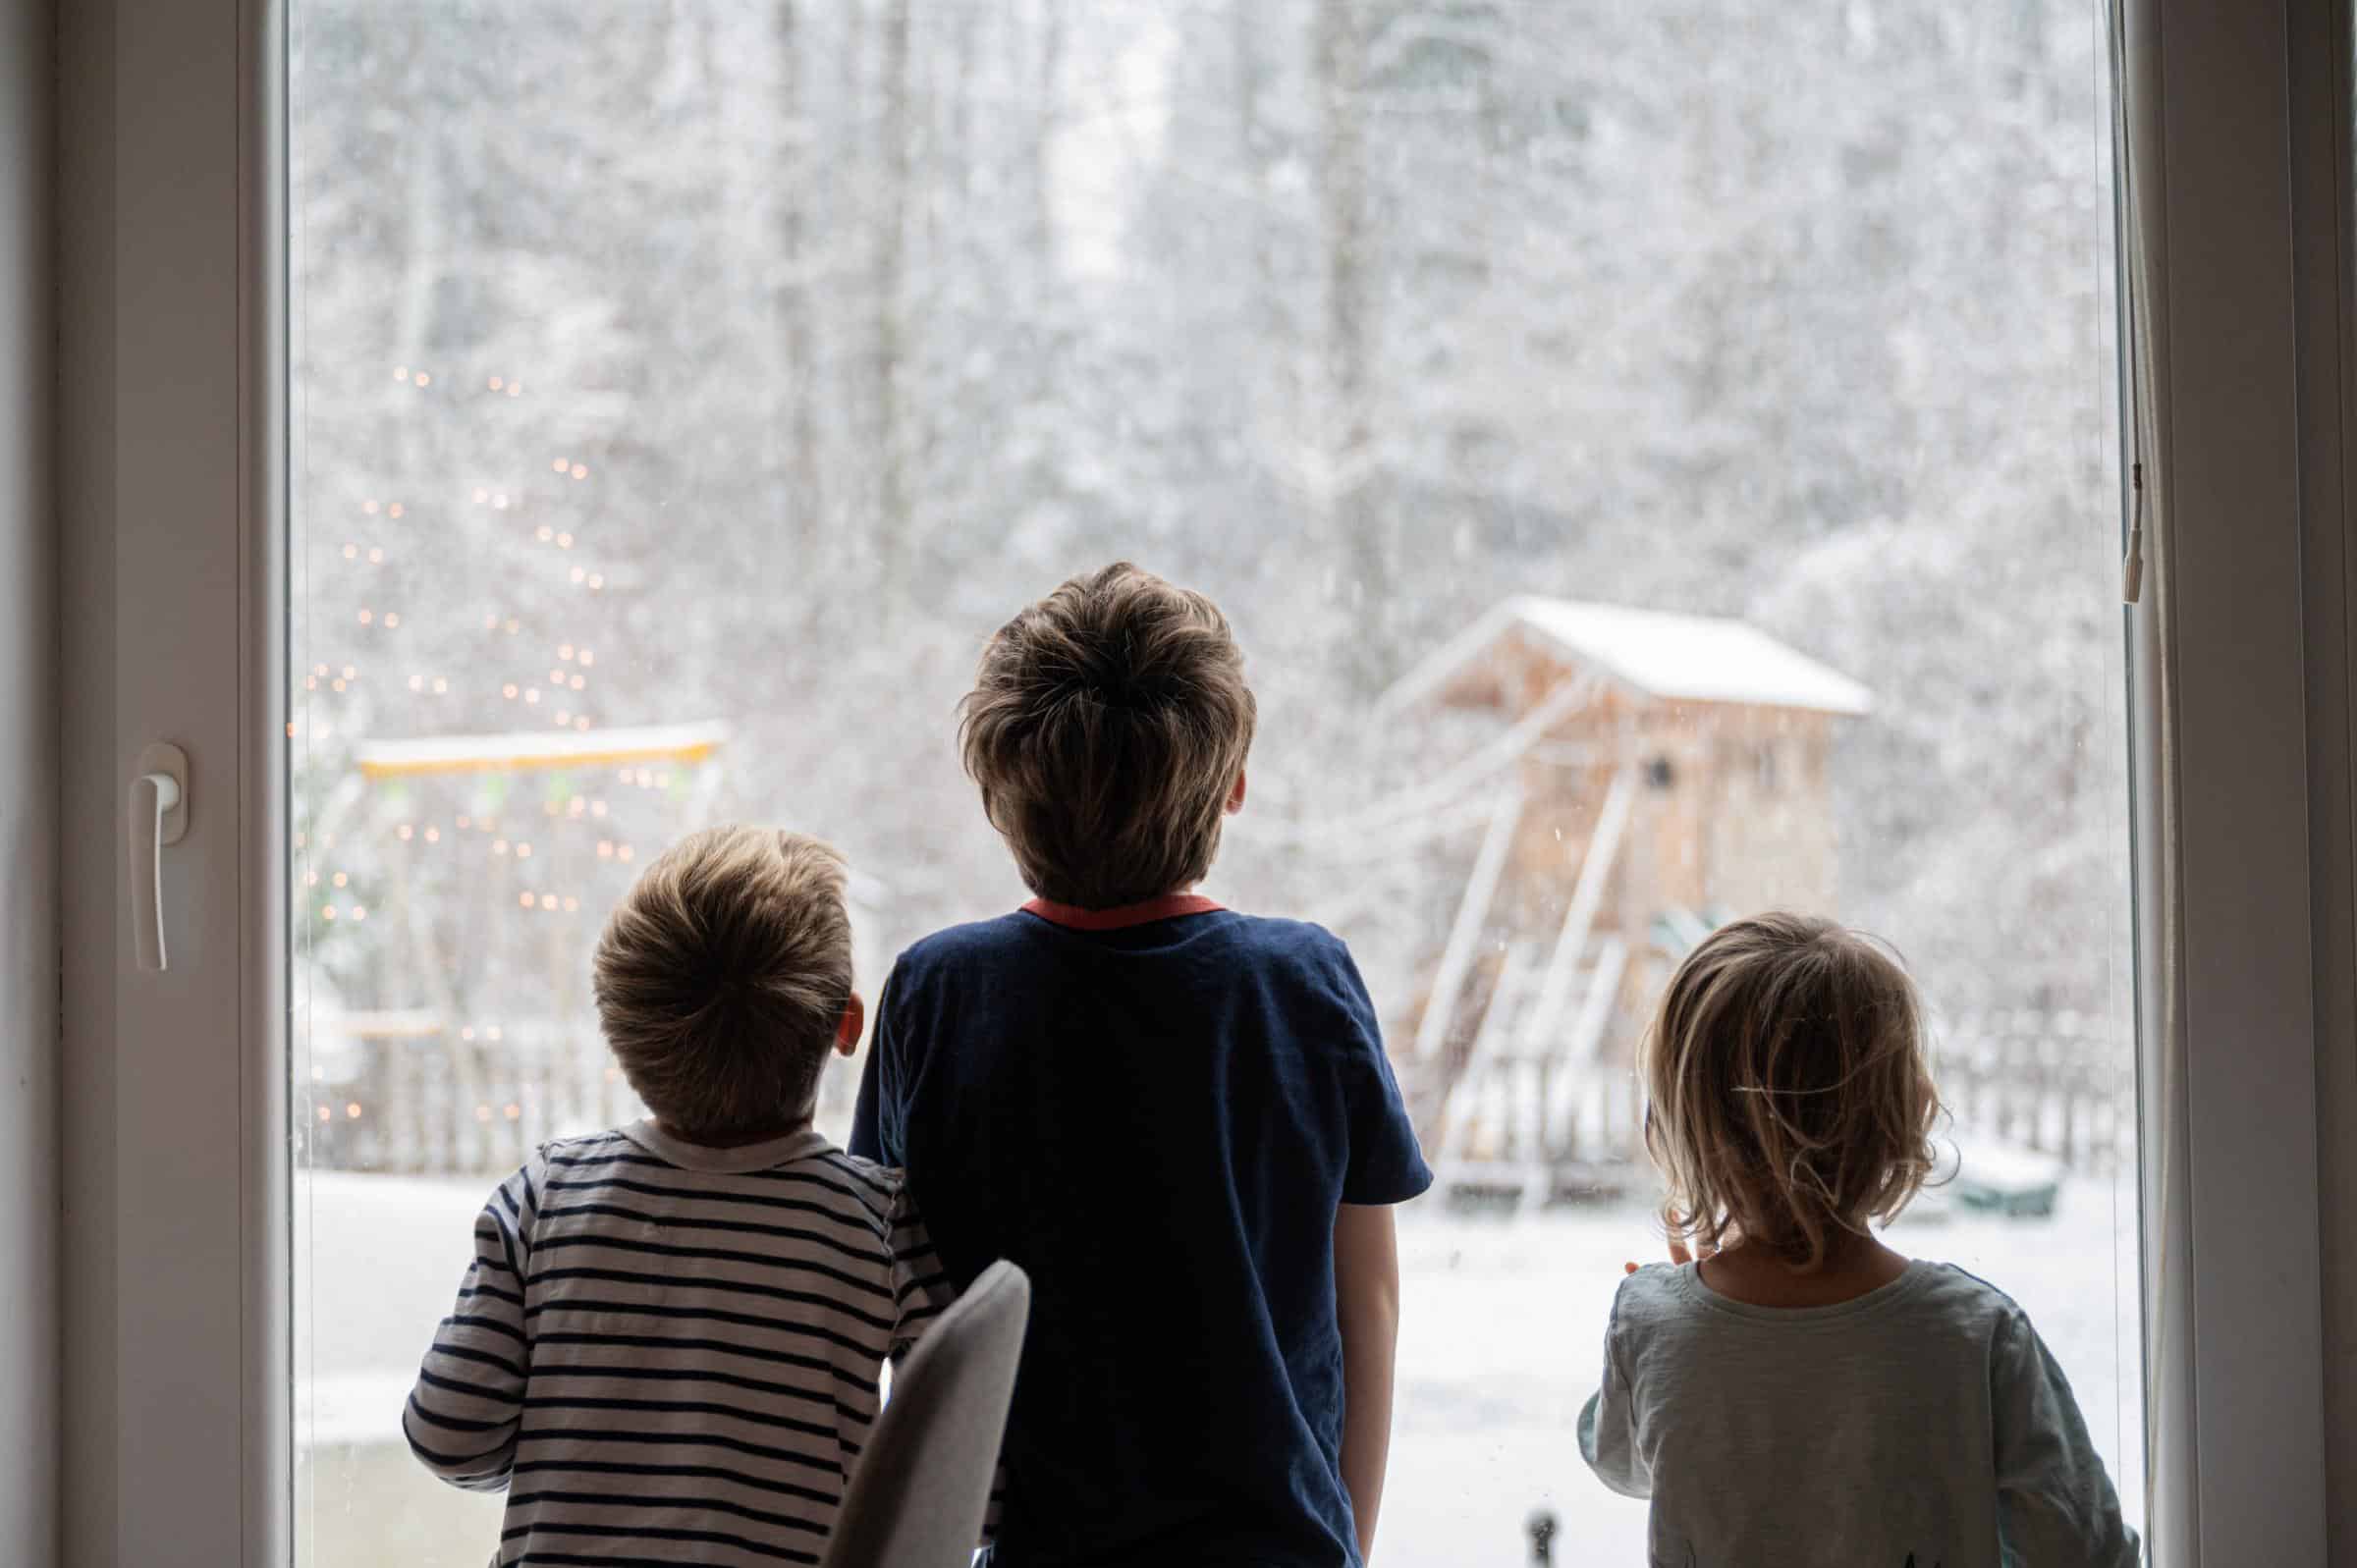 Children looking out window in winter